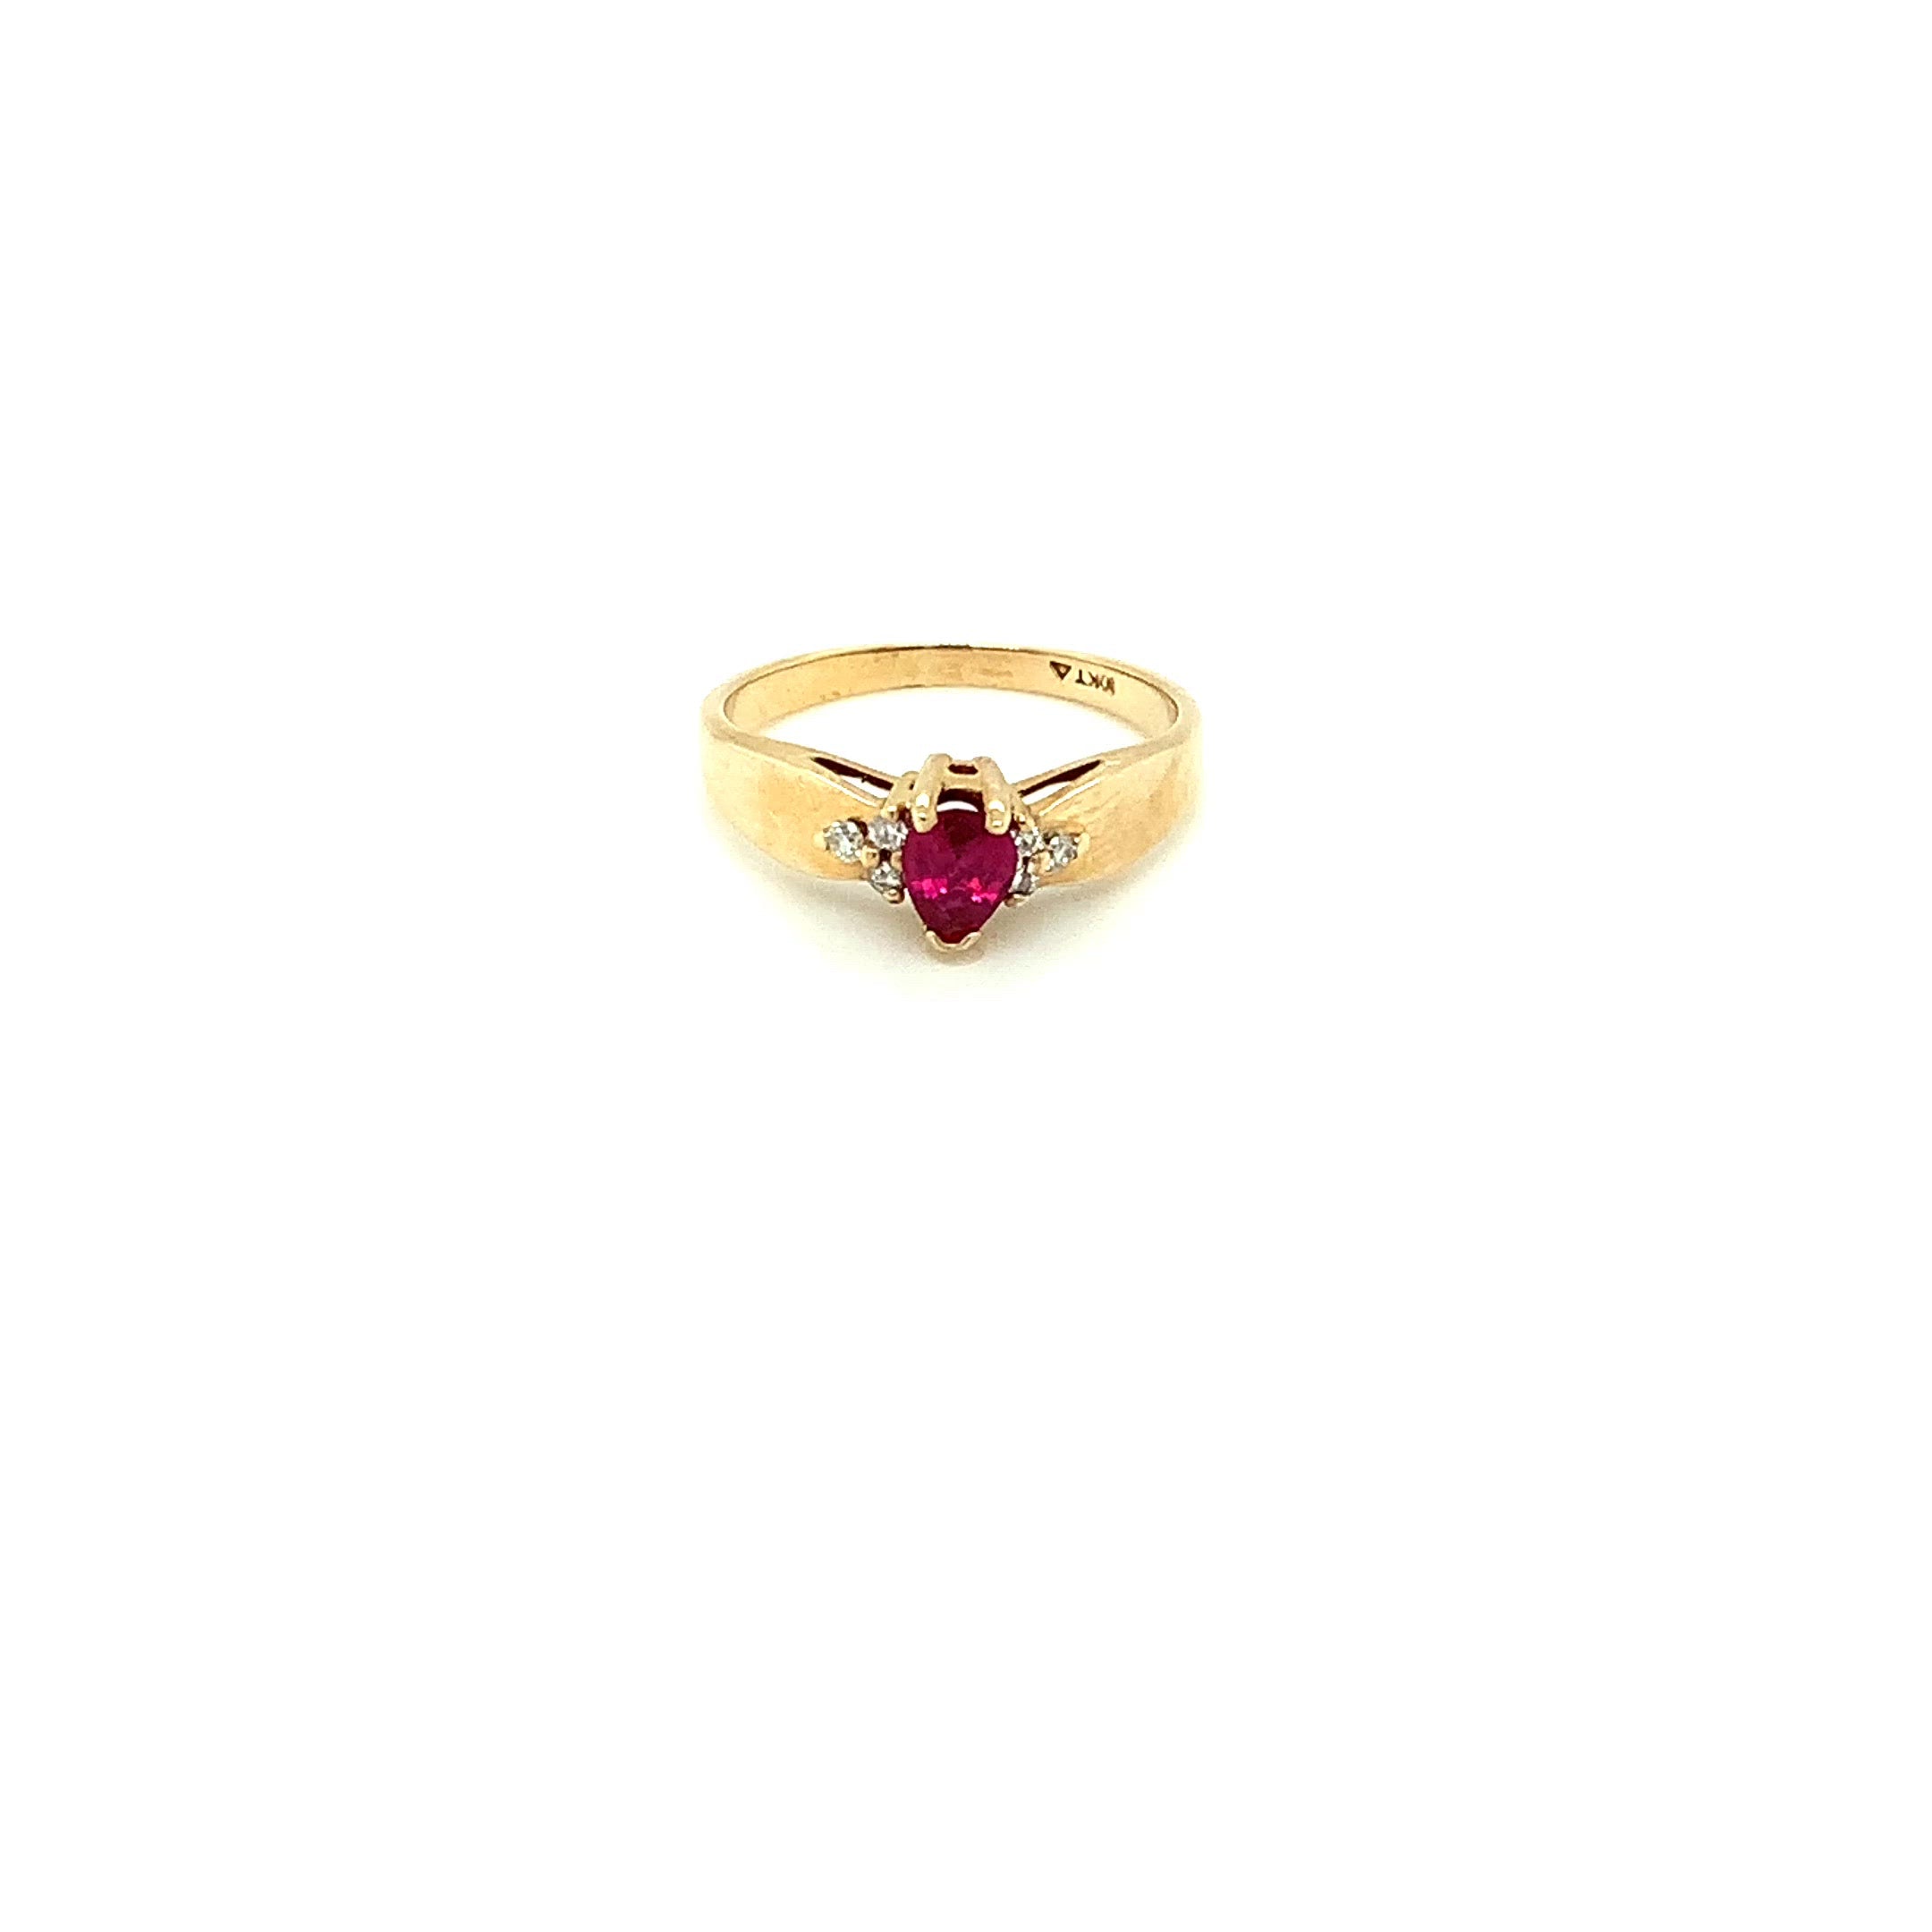 Certified Natural Ruby & Diamond Ring 10K Solid Gold .48tcw Gemstone Anniversary Estate Jewelry